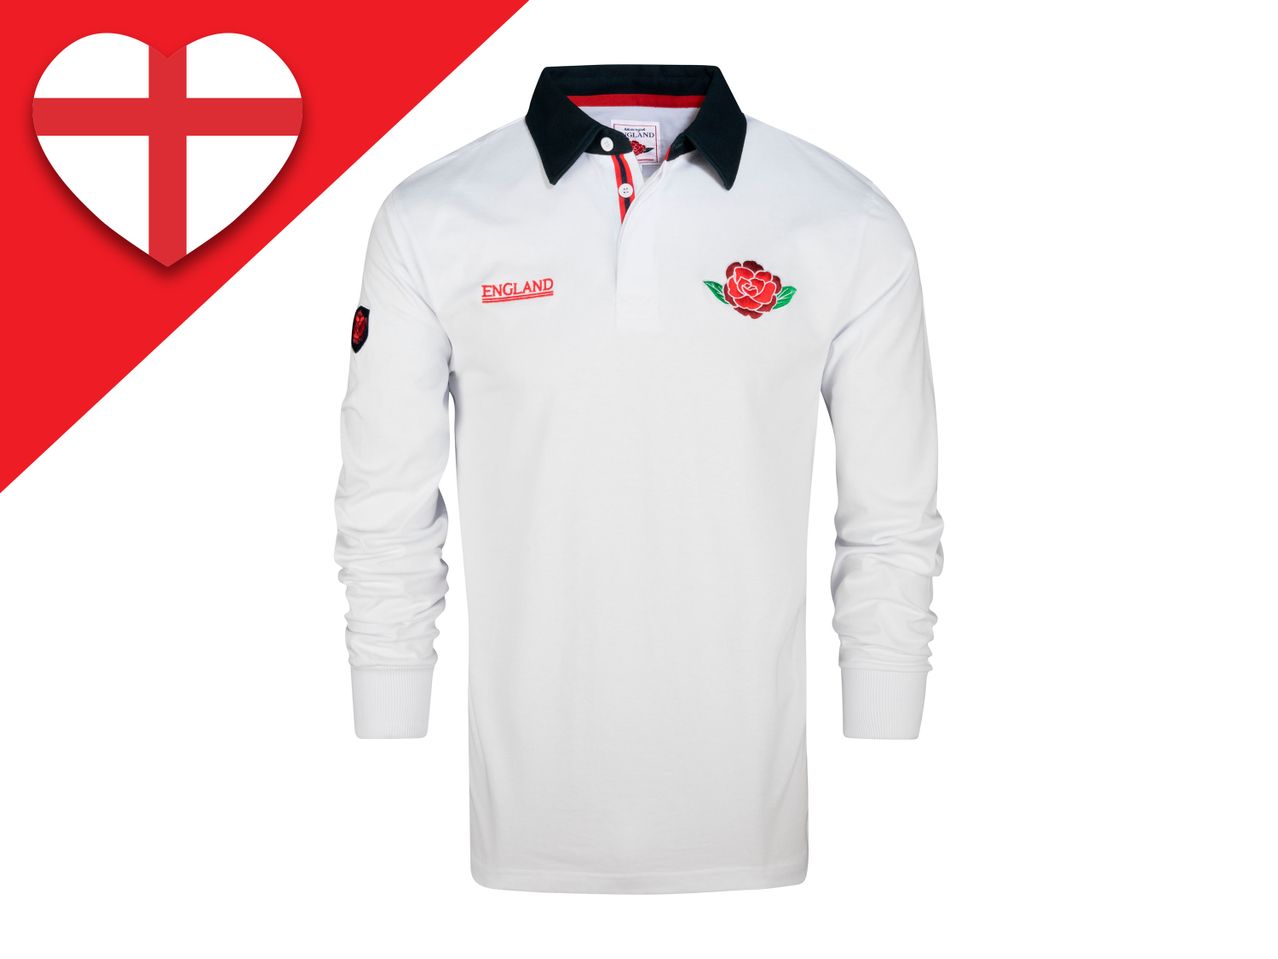 Go to full screen view: Adults’ England Rugby Shirt - Image 1